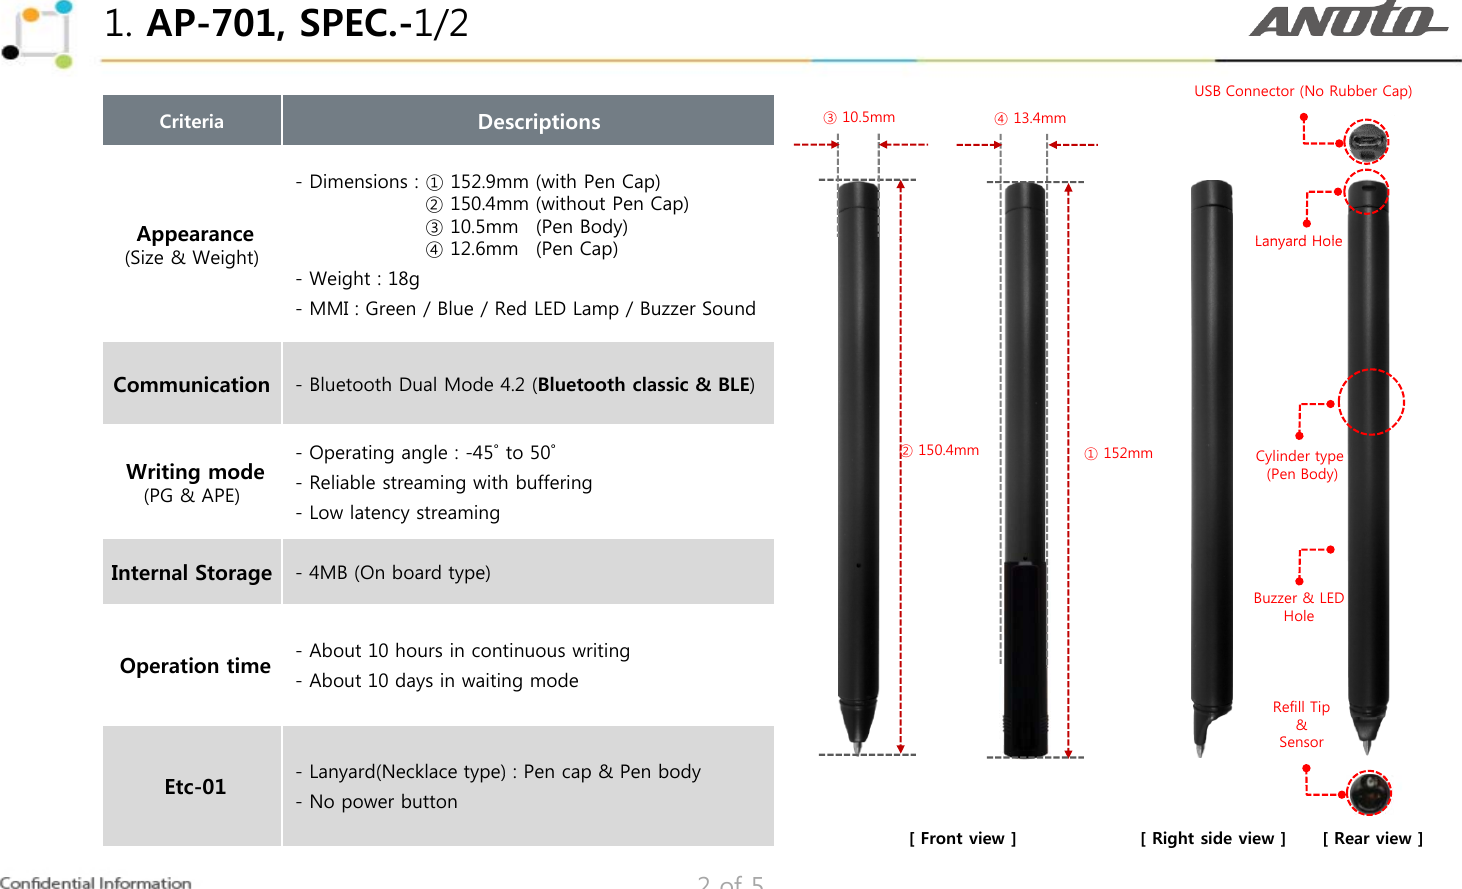 1. AP-701, SPEC.-1/2USB Connector (No Rubber Cap)Criteria      DescriptionsAppearance- Dimensions : ① 152.9mm (with Pen Cap)- Dimensions : ② 150.4mm (without Pen Cap)- Dimensions : ③ 10.5mm  .(Pen Body)③ 10.5mm ④ 13.4mmLanyard HoleAppearance(Size &amp; Weight) - Dimensions : ④ 12.6mm  .(Pen Cap)- Weight : 18g- MMI : Green / Blue / Red LED Lamp / Buzzer SoundLanyard HoleCommunication - Bluetooth Dual Mode 4.2 (Bluetooth classic &amp; BLE)Writing mode(PG &amp; APE)- Operating angle : -45˚ to 50˚- Reliable streaming with bufferingLlt t i② 150.4mm ① 152mm Cylinder type (Pen Body)-Low latency streamingInternal Storage - 4MB (On board type)Buzzer &amp; LEDHoleOperation time - About 10 hours in continuous writing- About 10 days in waiting mode-Lanyard(Necklace type) : Pen cap &amp; Pen bodyRefill Tip&amp;Sensor2 of 5Etc-01Lanyard(Necklace type) : Pen cap &amp; Pen body- No power button[ Front view ] [ Right side view ] [ Rear view ]